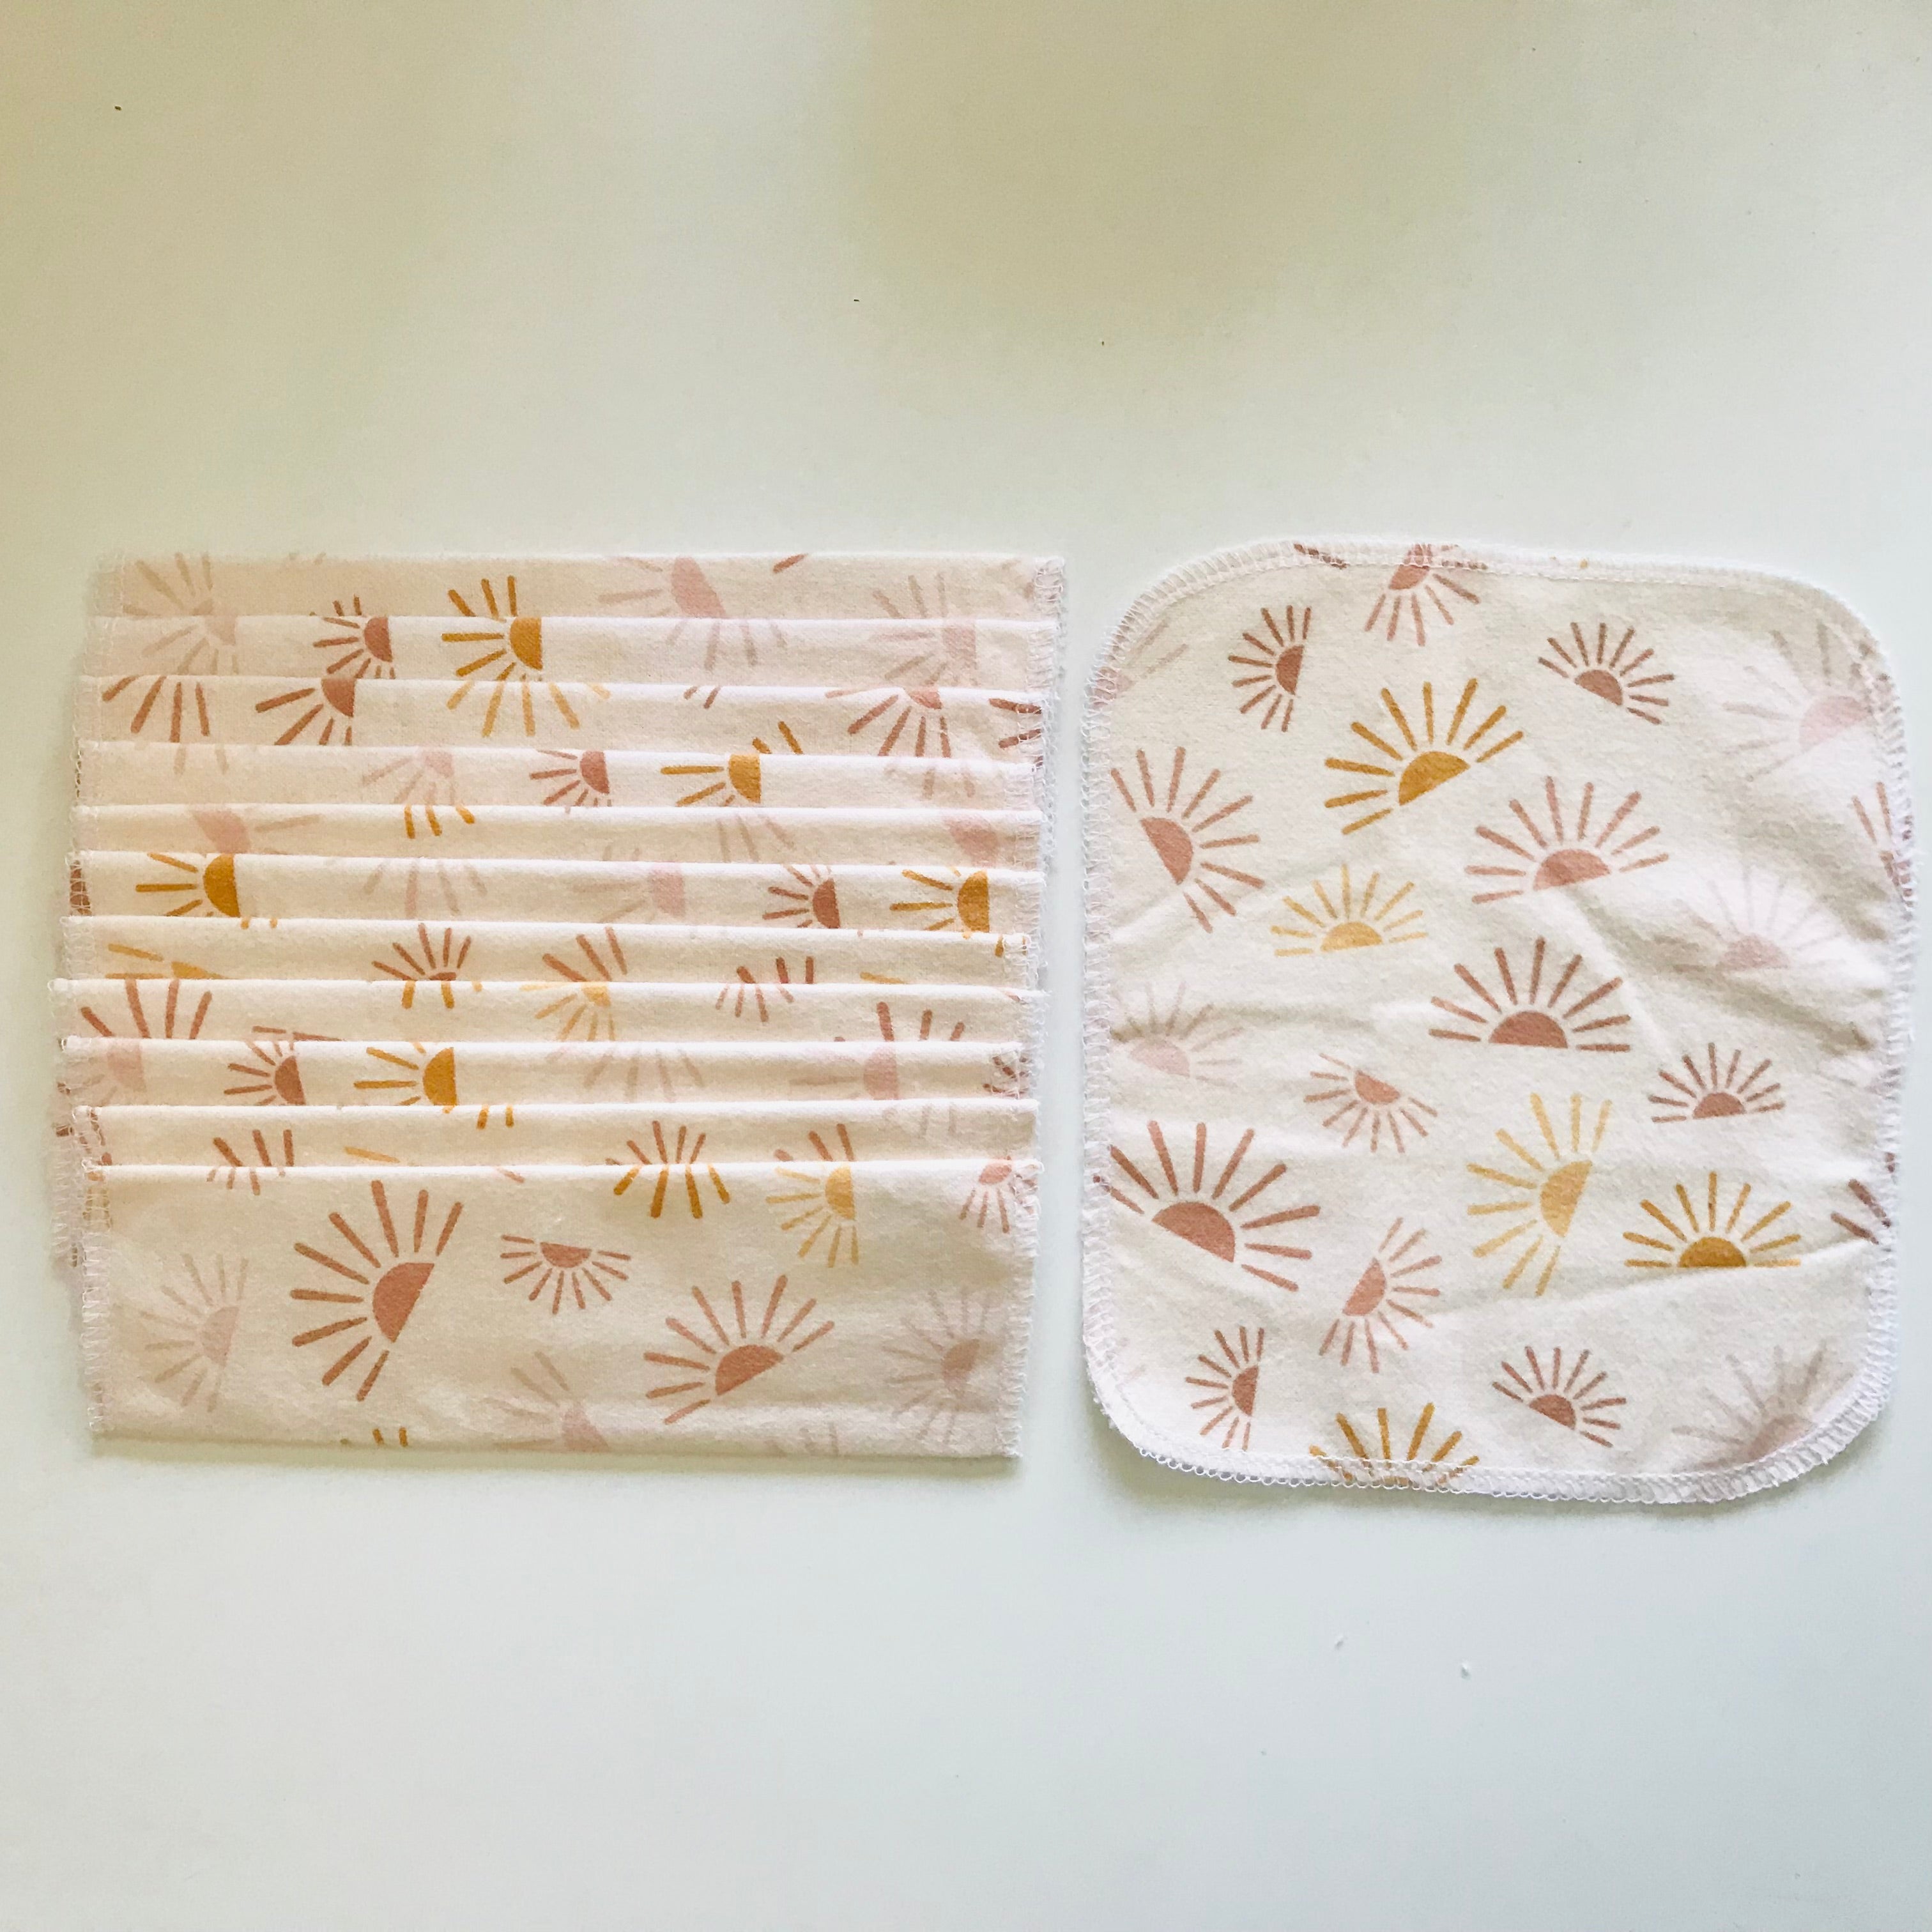 No Waste Reusable Baby Wipes  - pack of 12